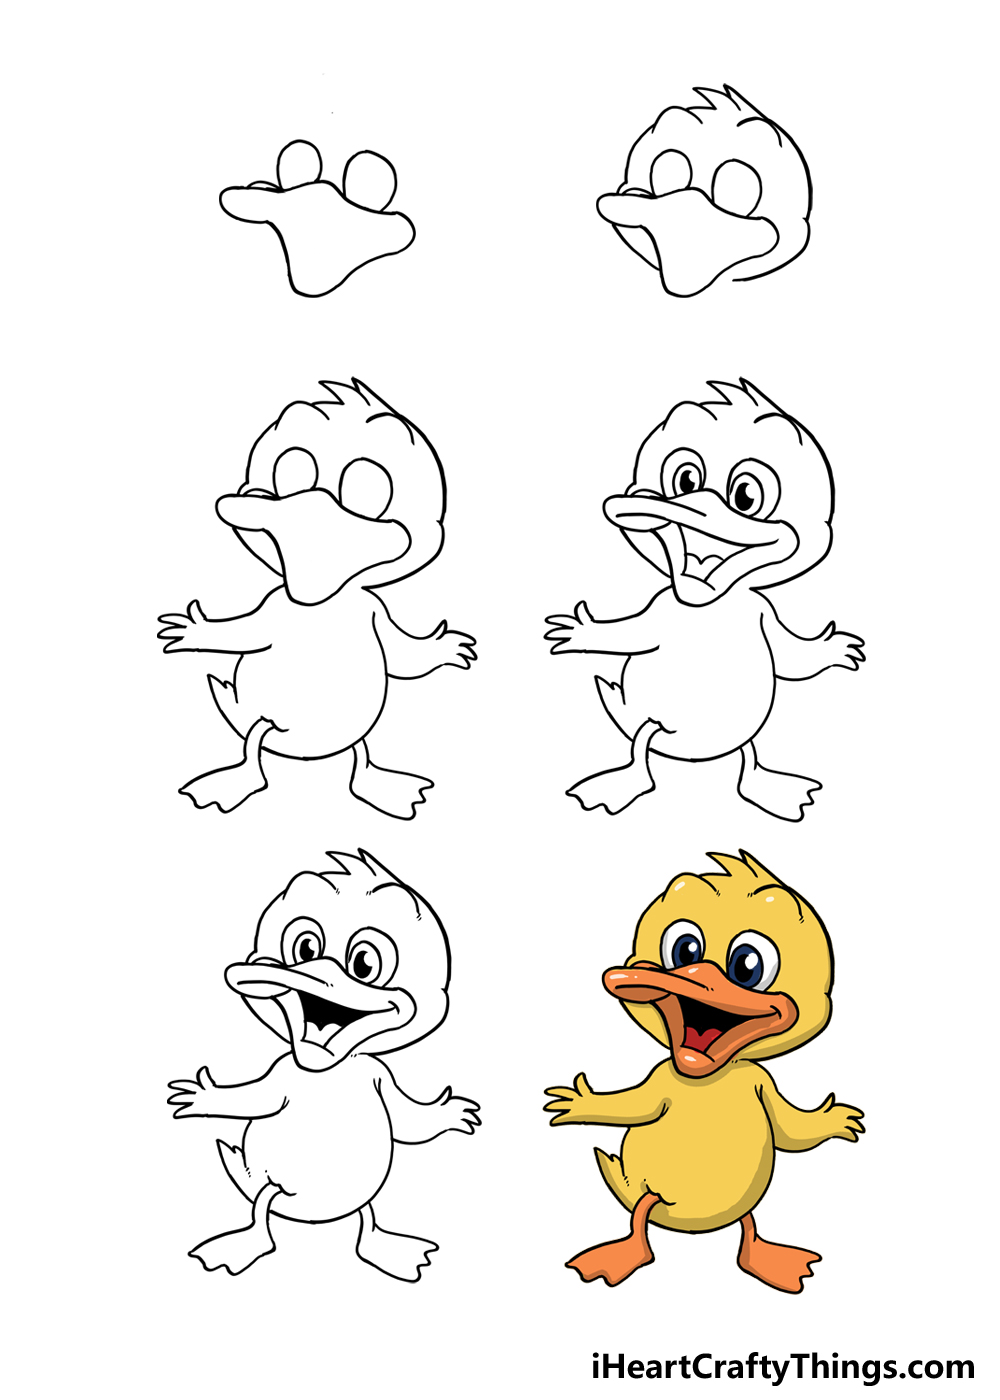 How to Draw A Cartoon Duck